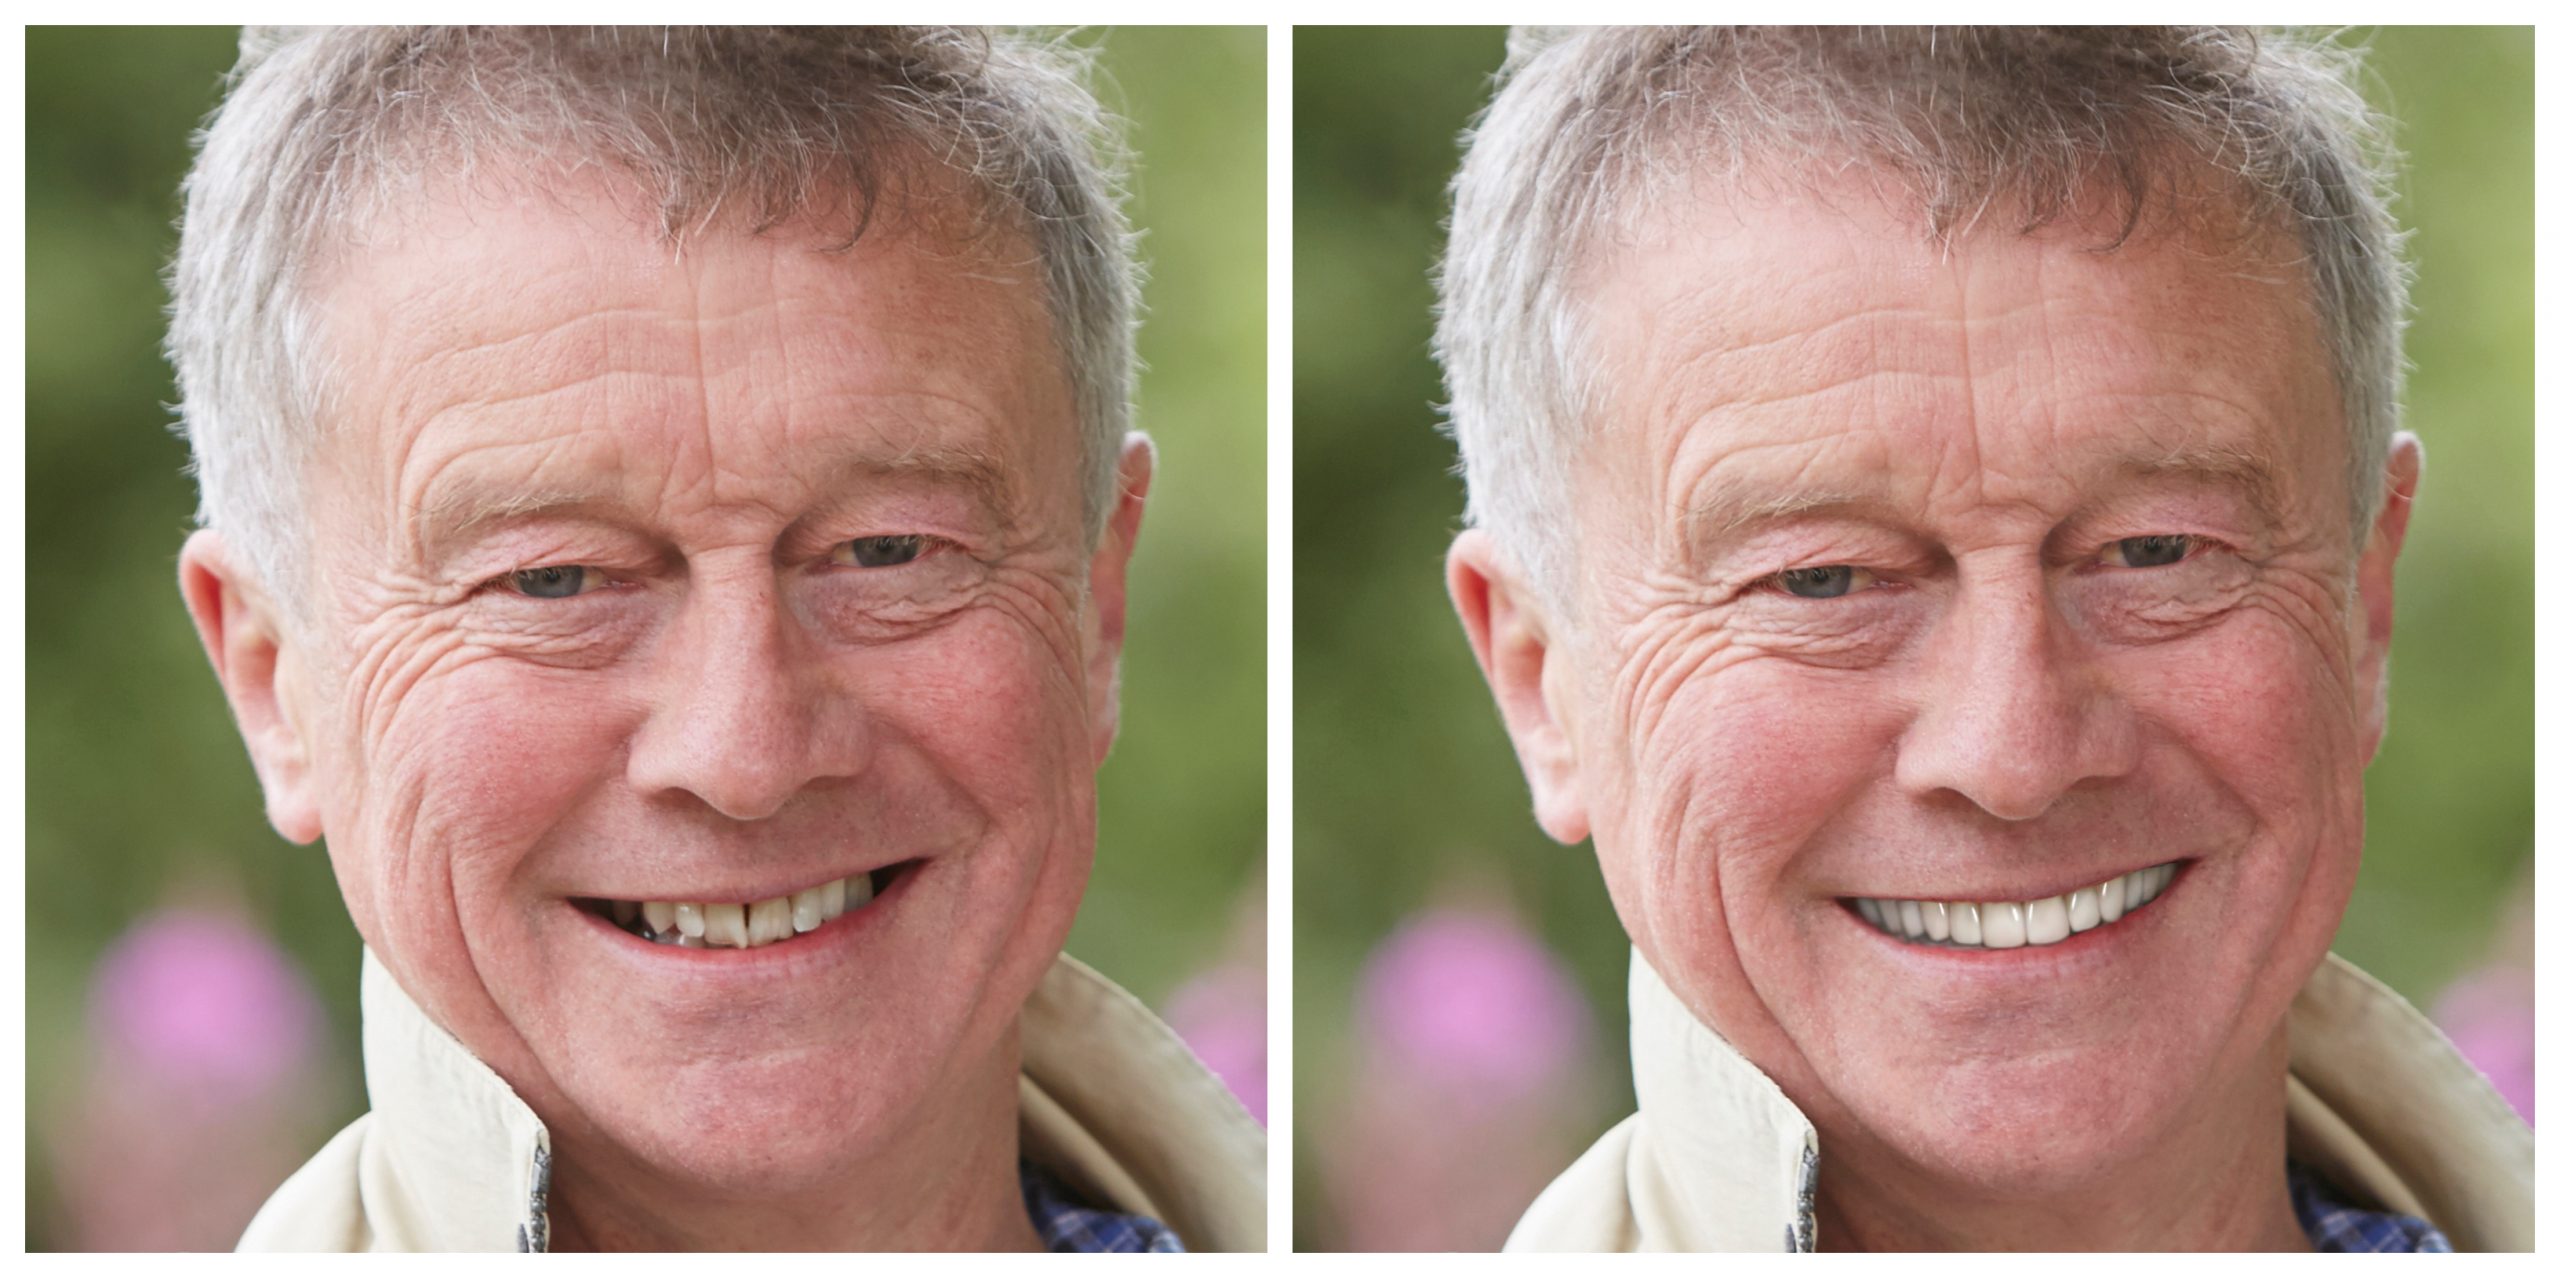 Smile Restoration - Before and After34